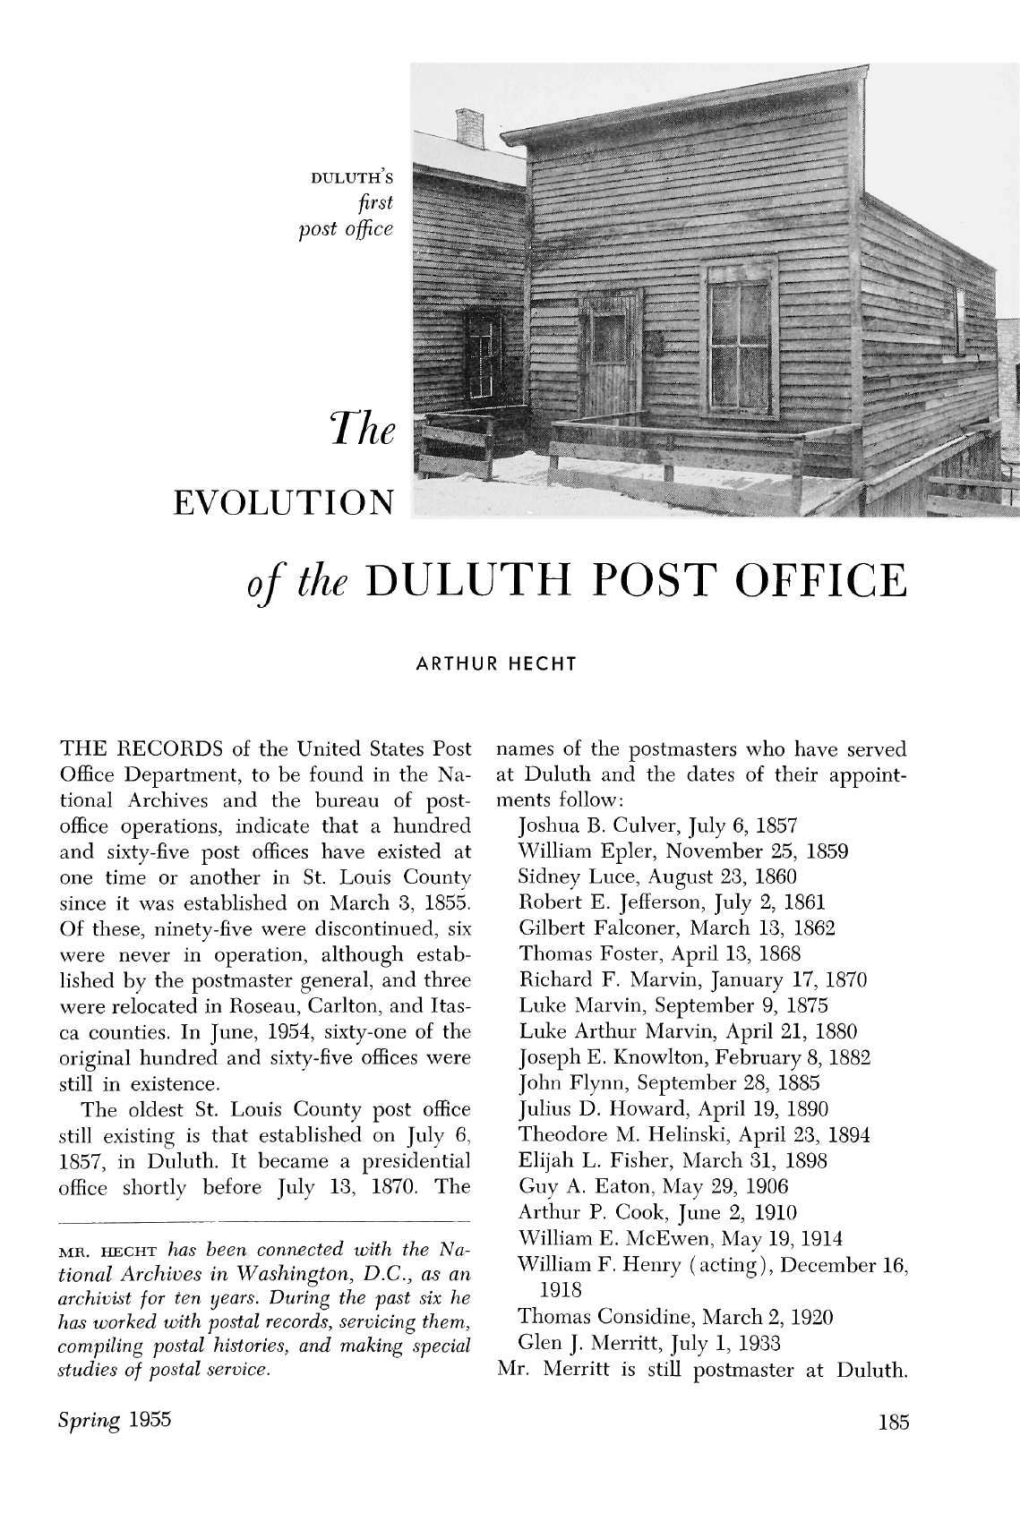 The Evolution of the Duluth Post Office